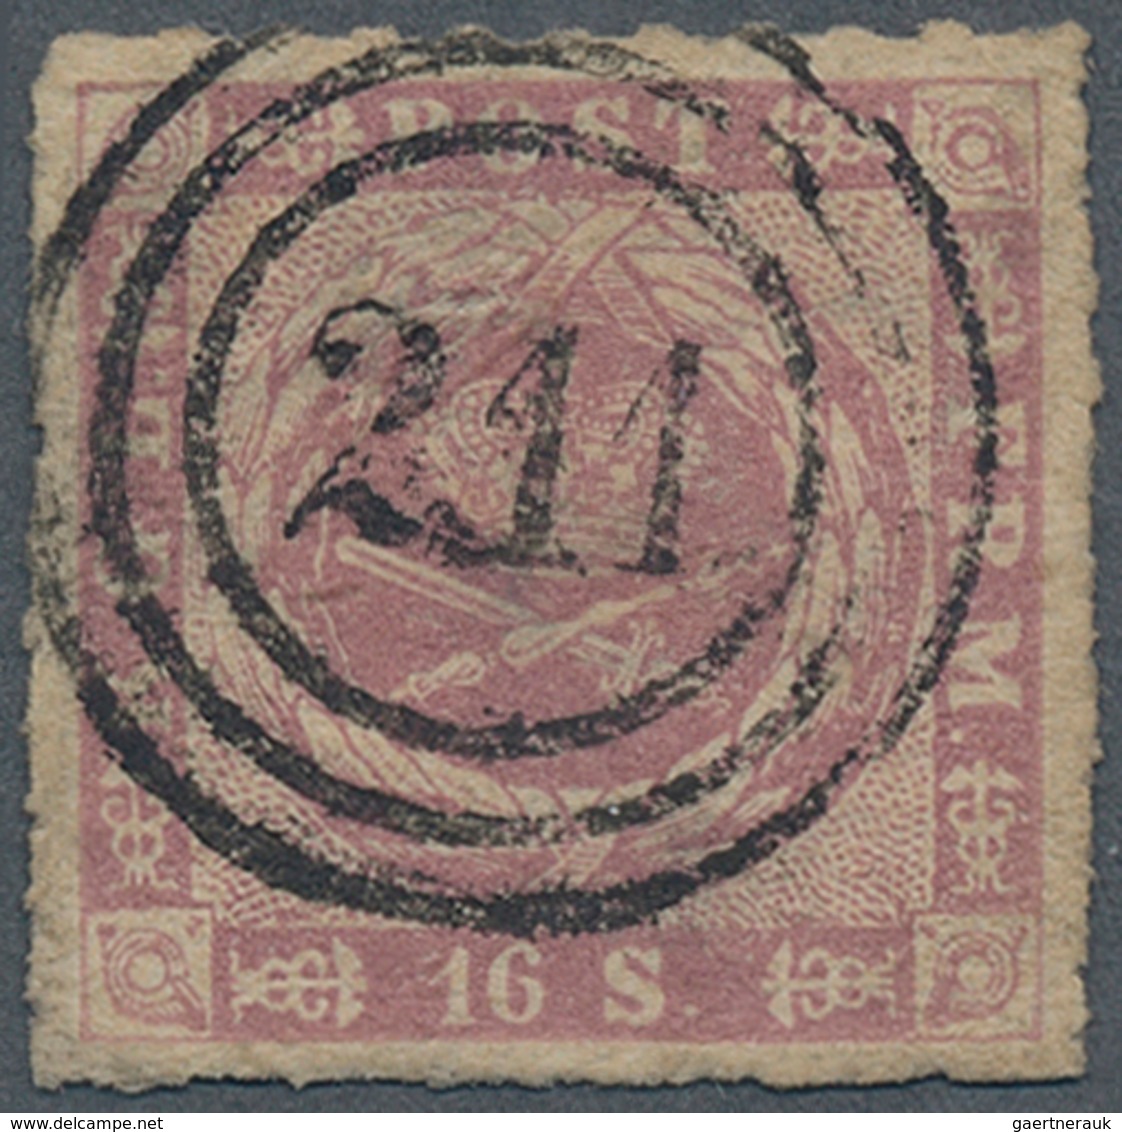 Dänemark: 1863, 16 Sk Rose-lilac, Rouletted 11, With Clear Numeral Cancellation "211" (KBH NORREBRO - Nuovi